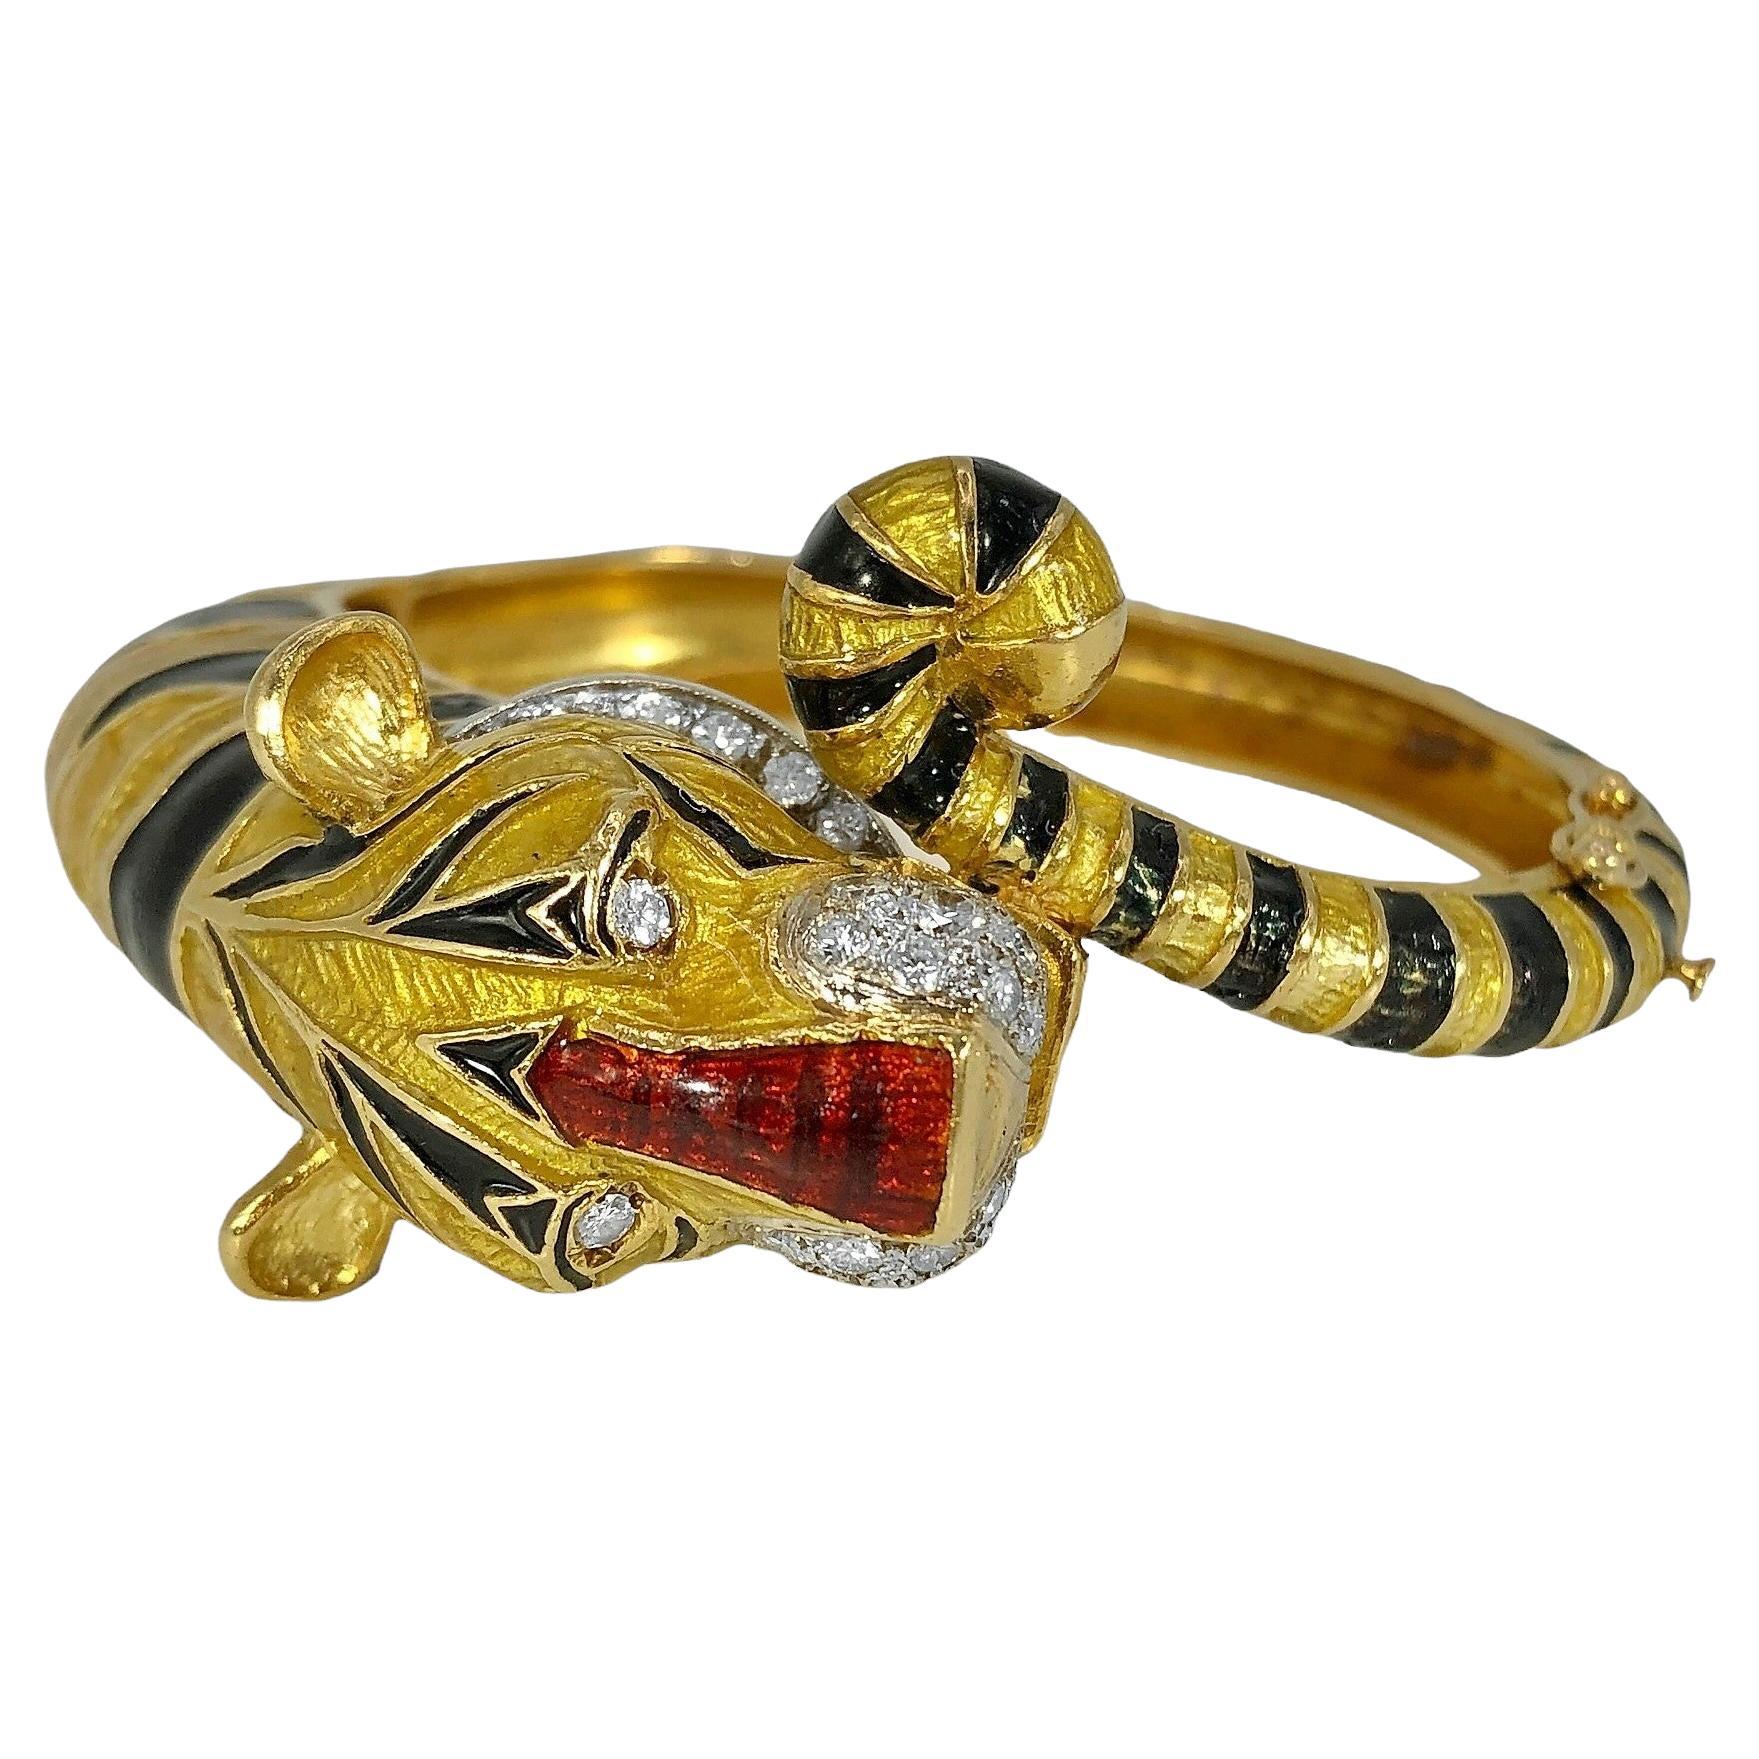 This striking Mid-20th Century Tiger motif hinged bangle bracelet is adorned with bright transparent gold and jet black opaque enamel. The life like head and collar are set generously with brilliant cut diamonds having a 1.50ct total approximate